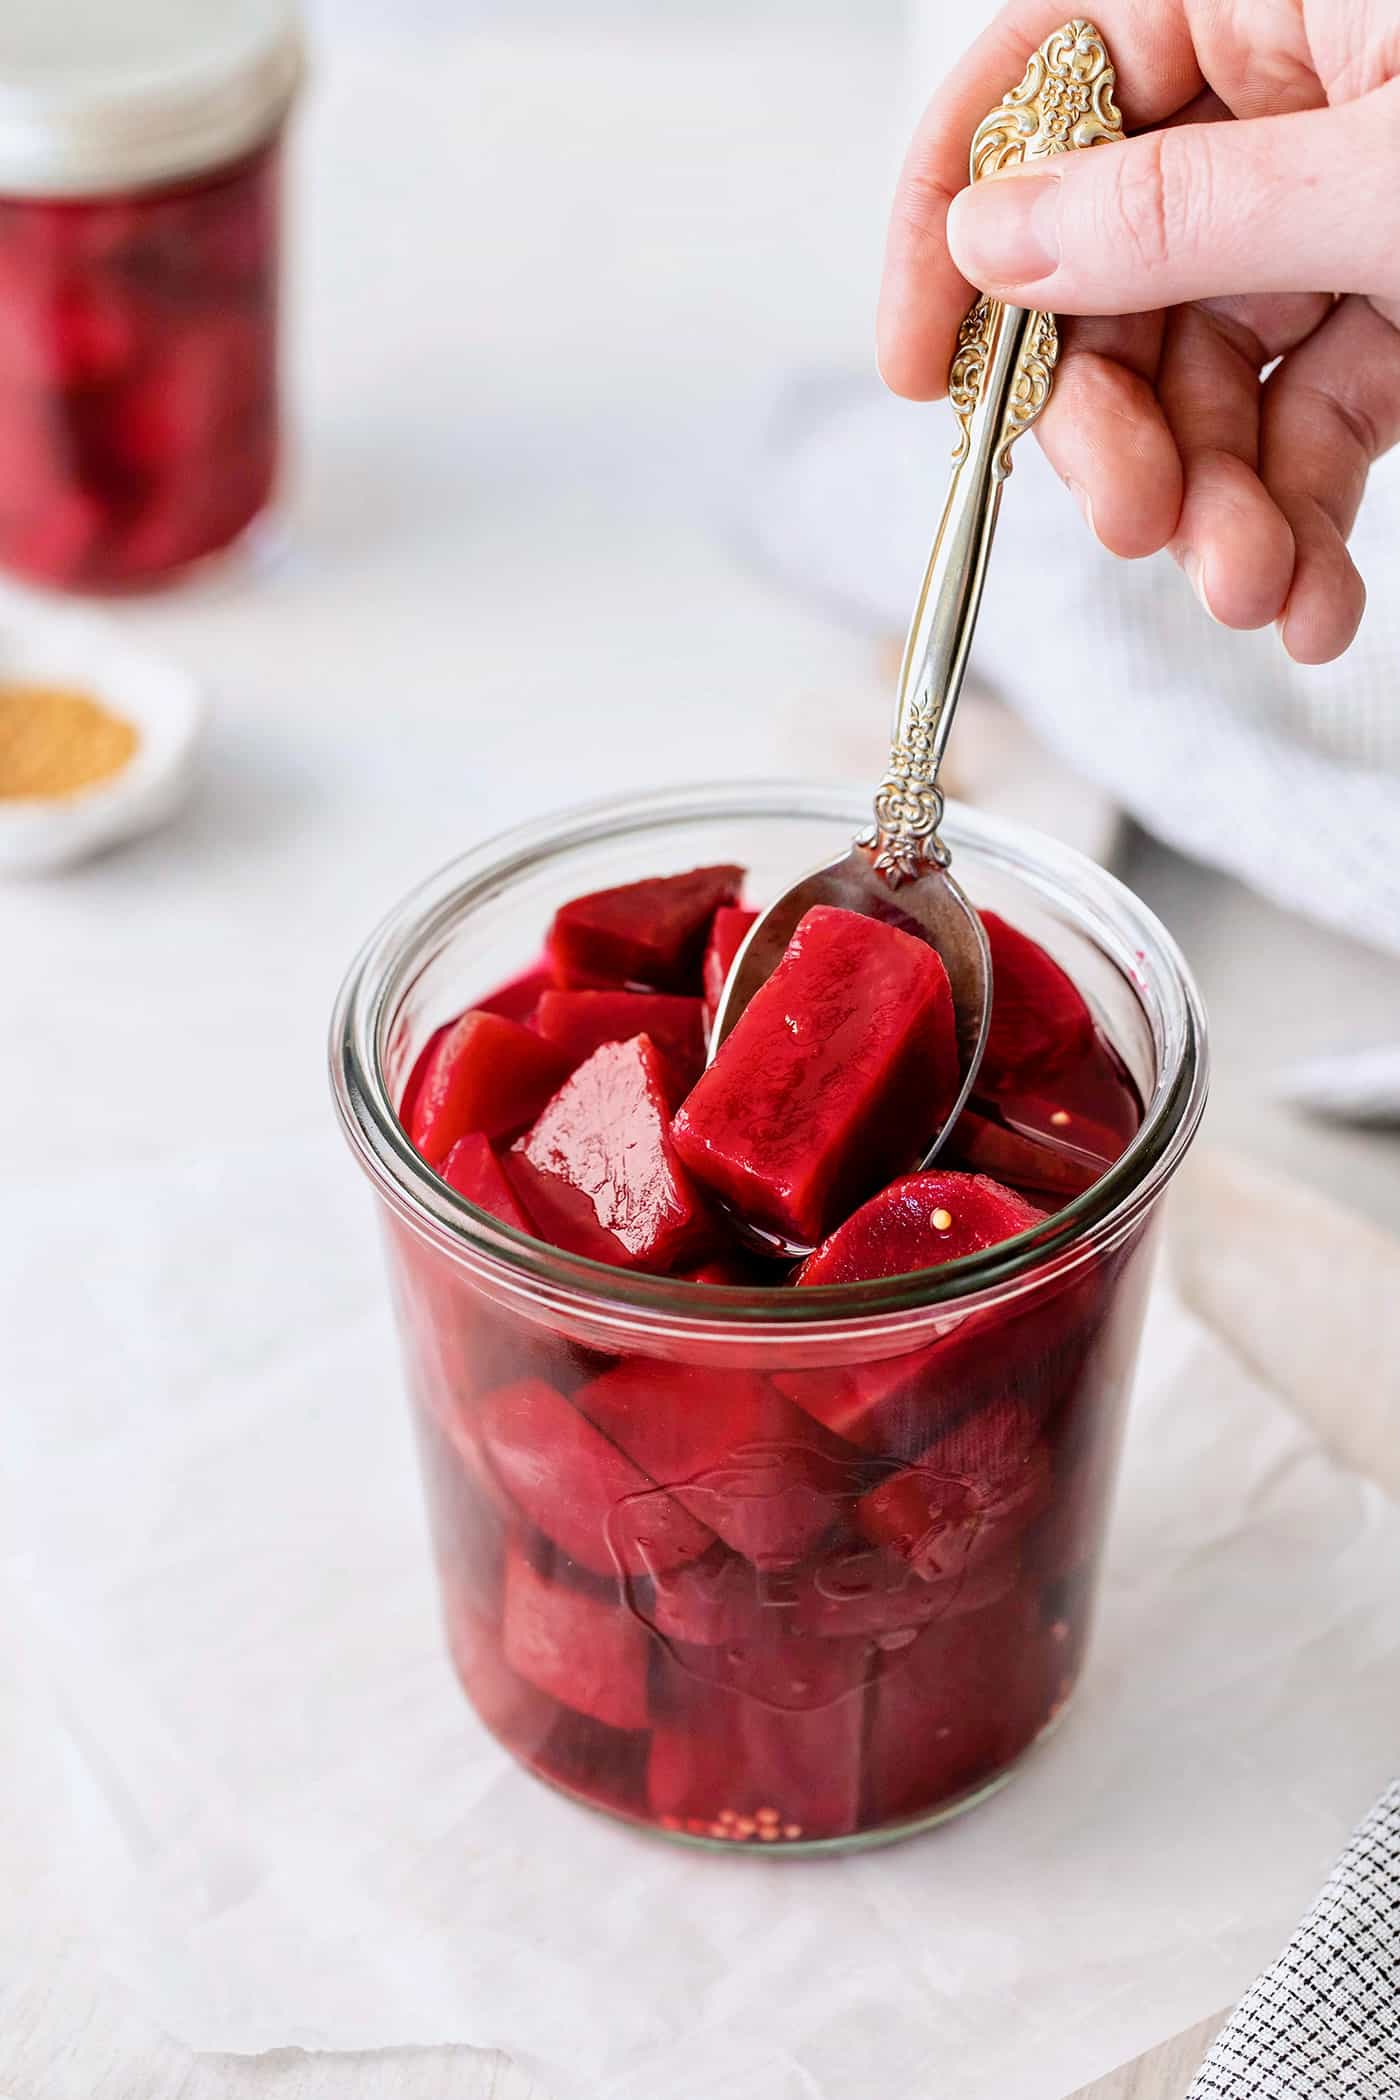 dipping a spoon into a jar of pickled beets